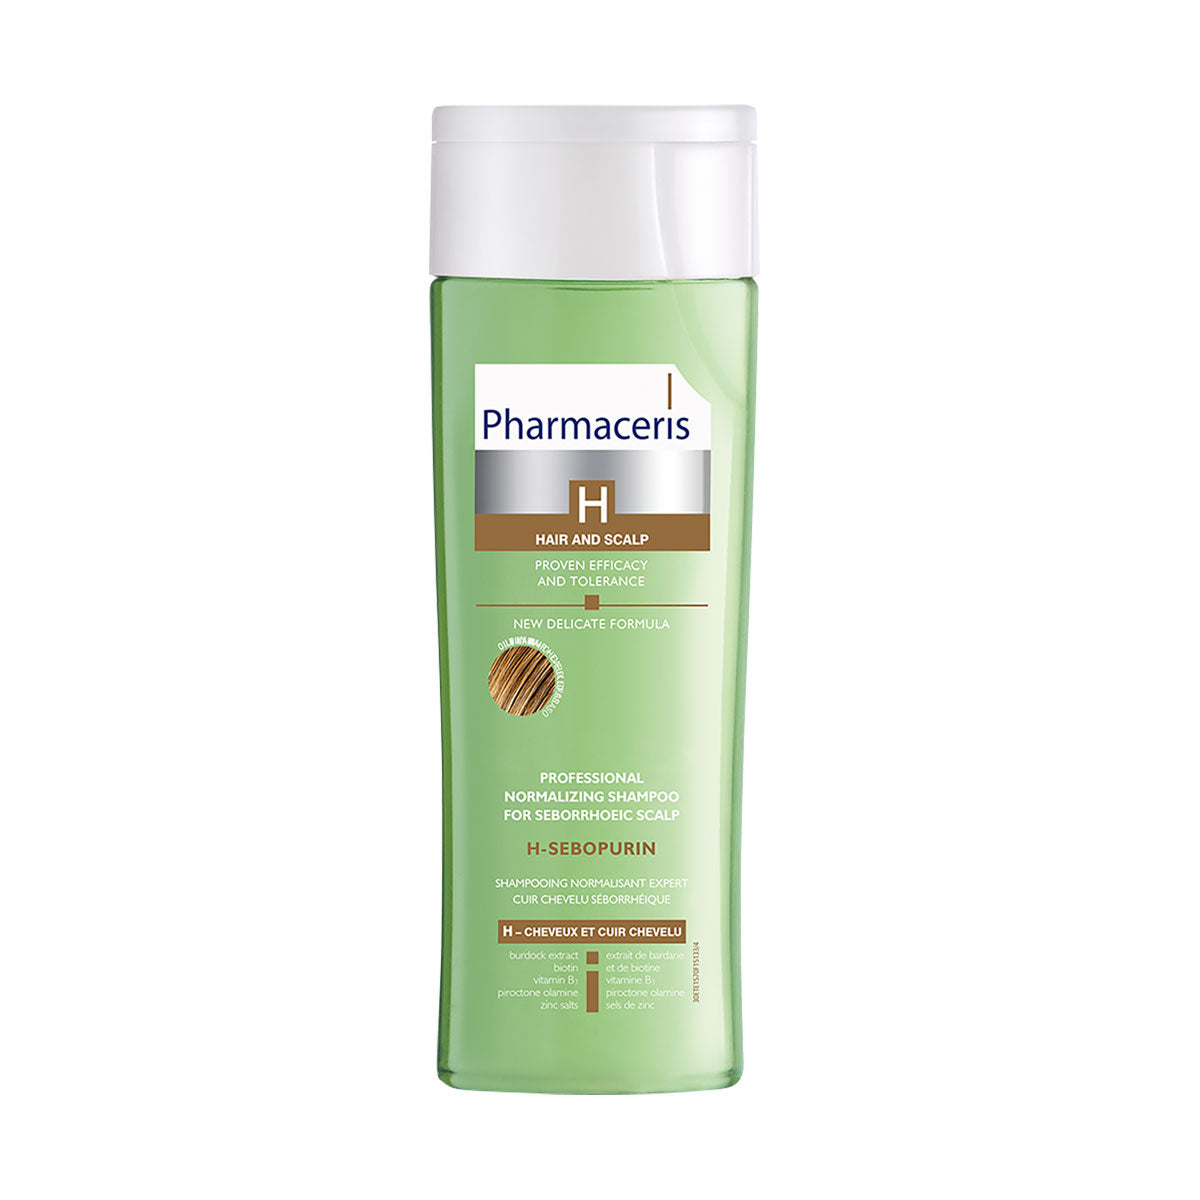 Professional Normalizing Shampoo For Seborrhoeic Scalp And Oily Hair H-Sebopurin